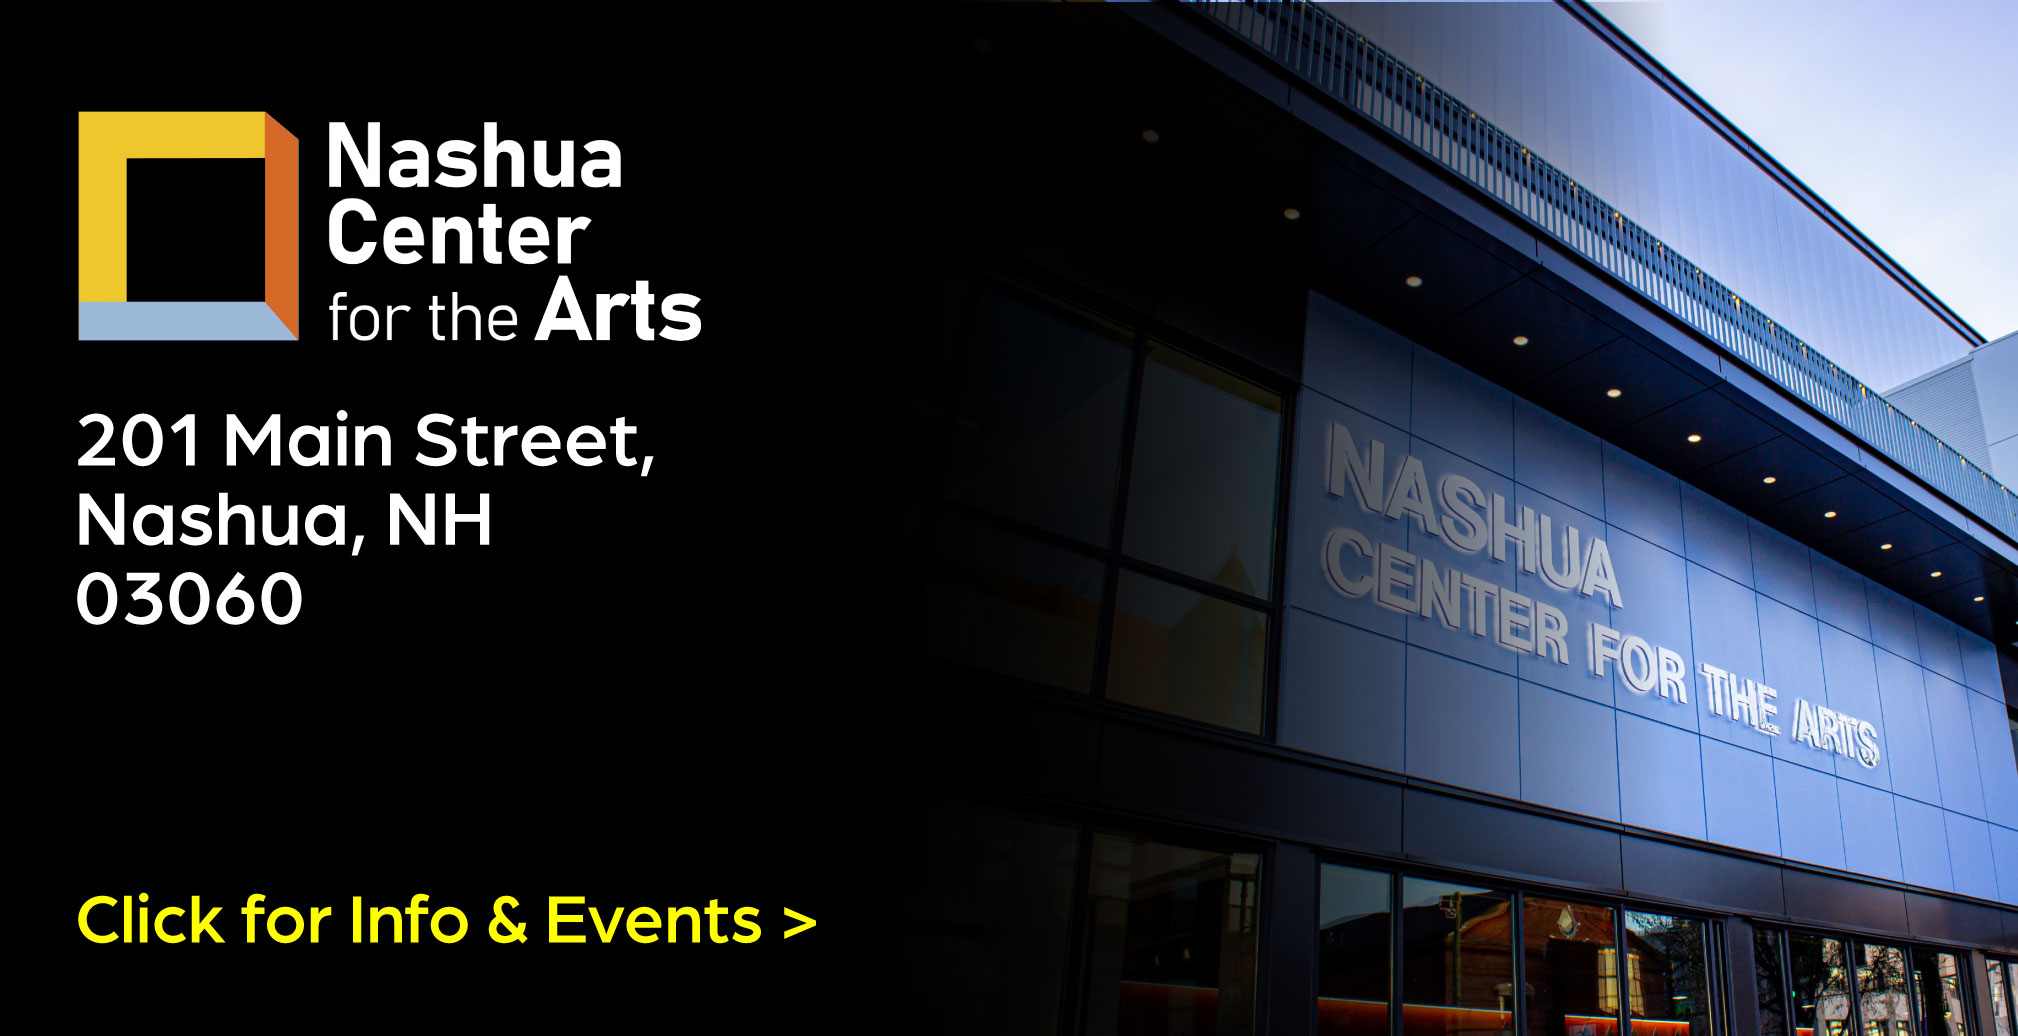 Learn more about Nashua Center for the arts